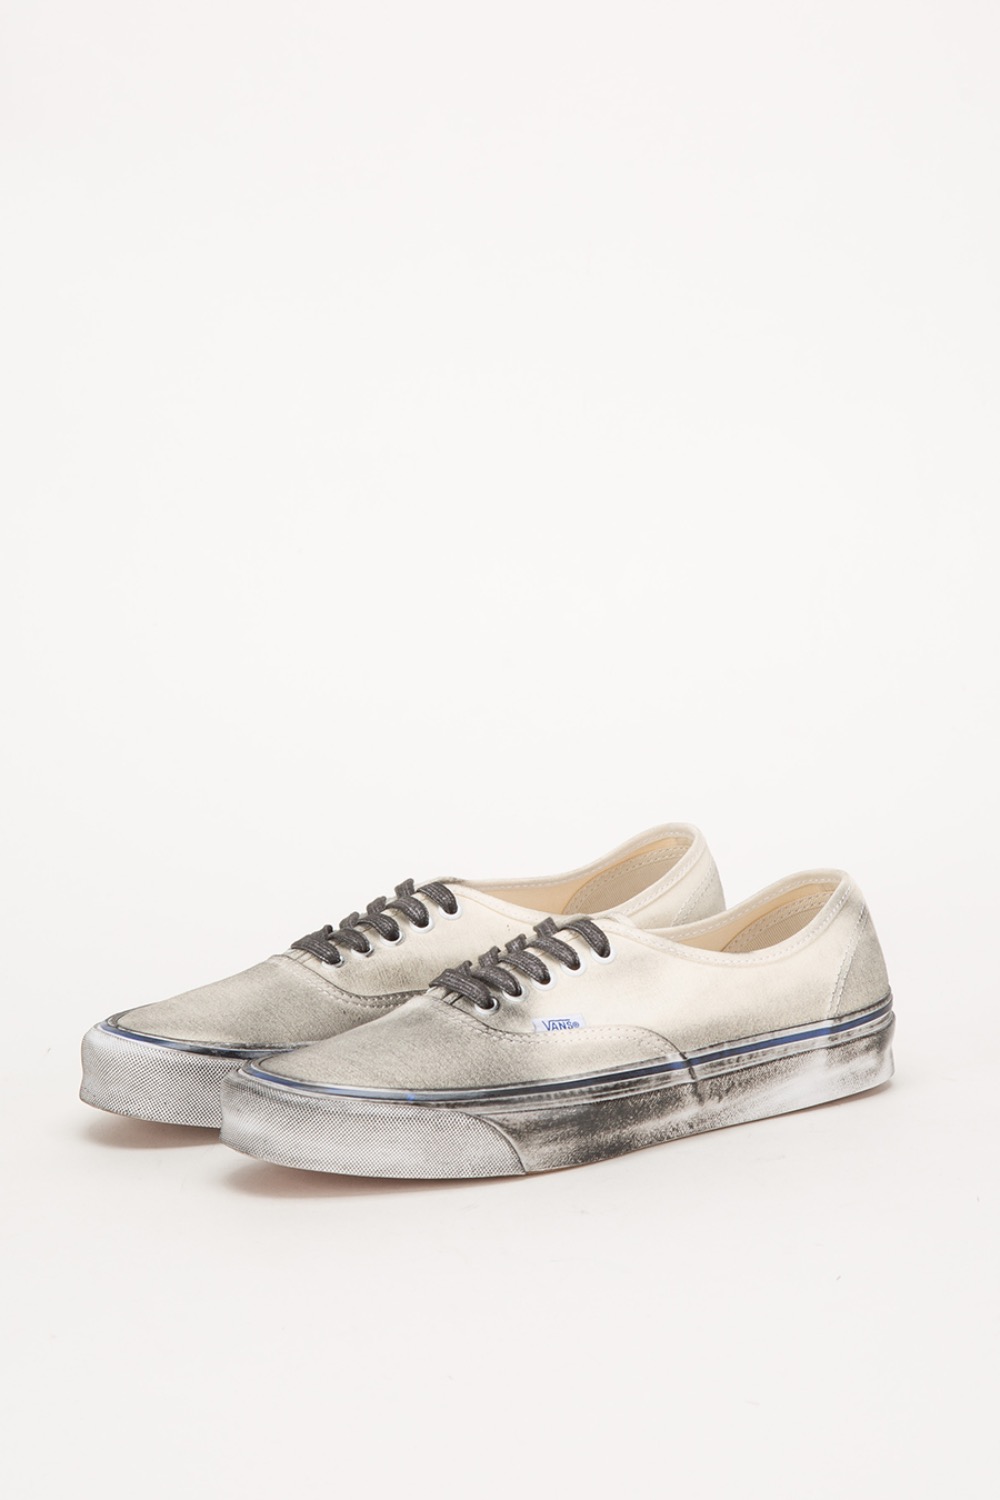 OG AUTHENTIC LX STRESSED CLASSIC WHITE